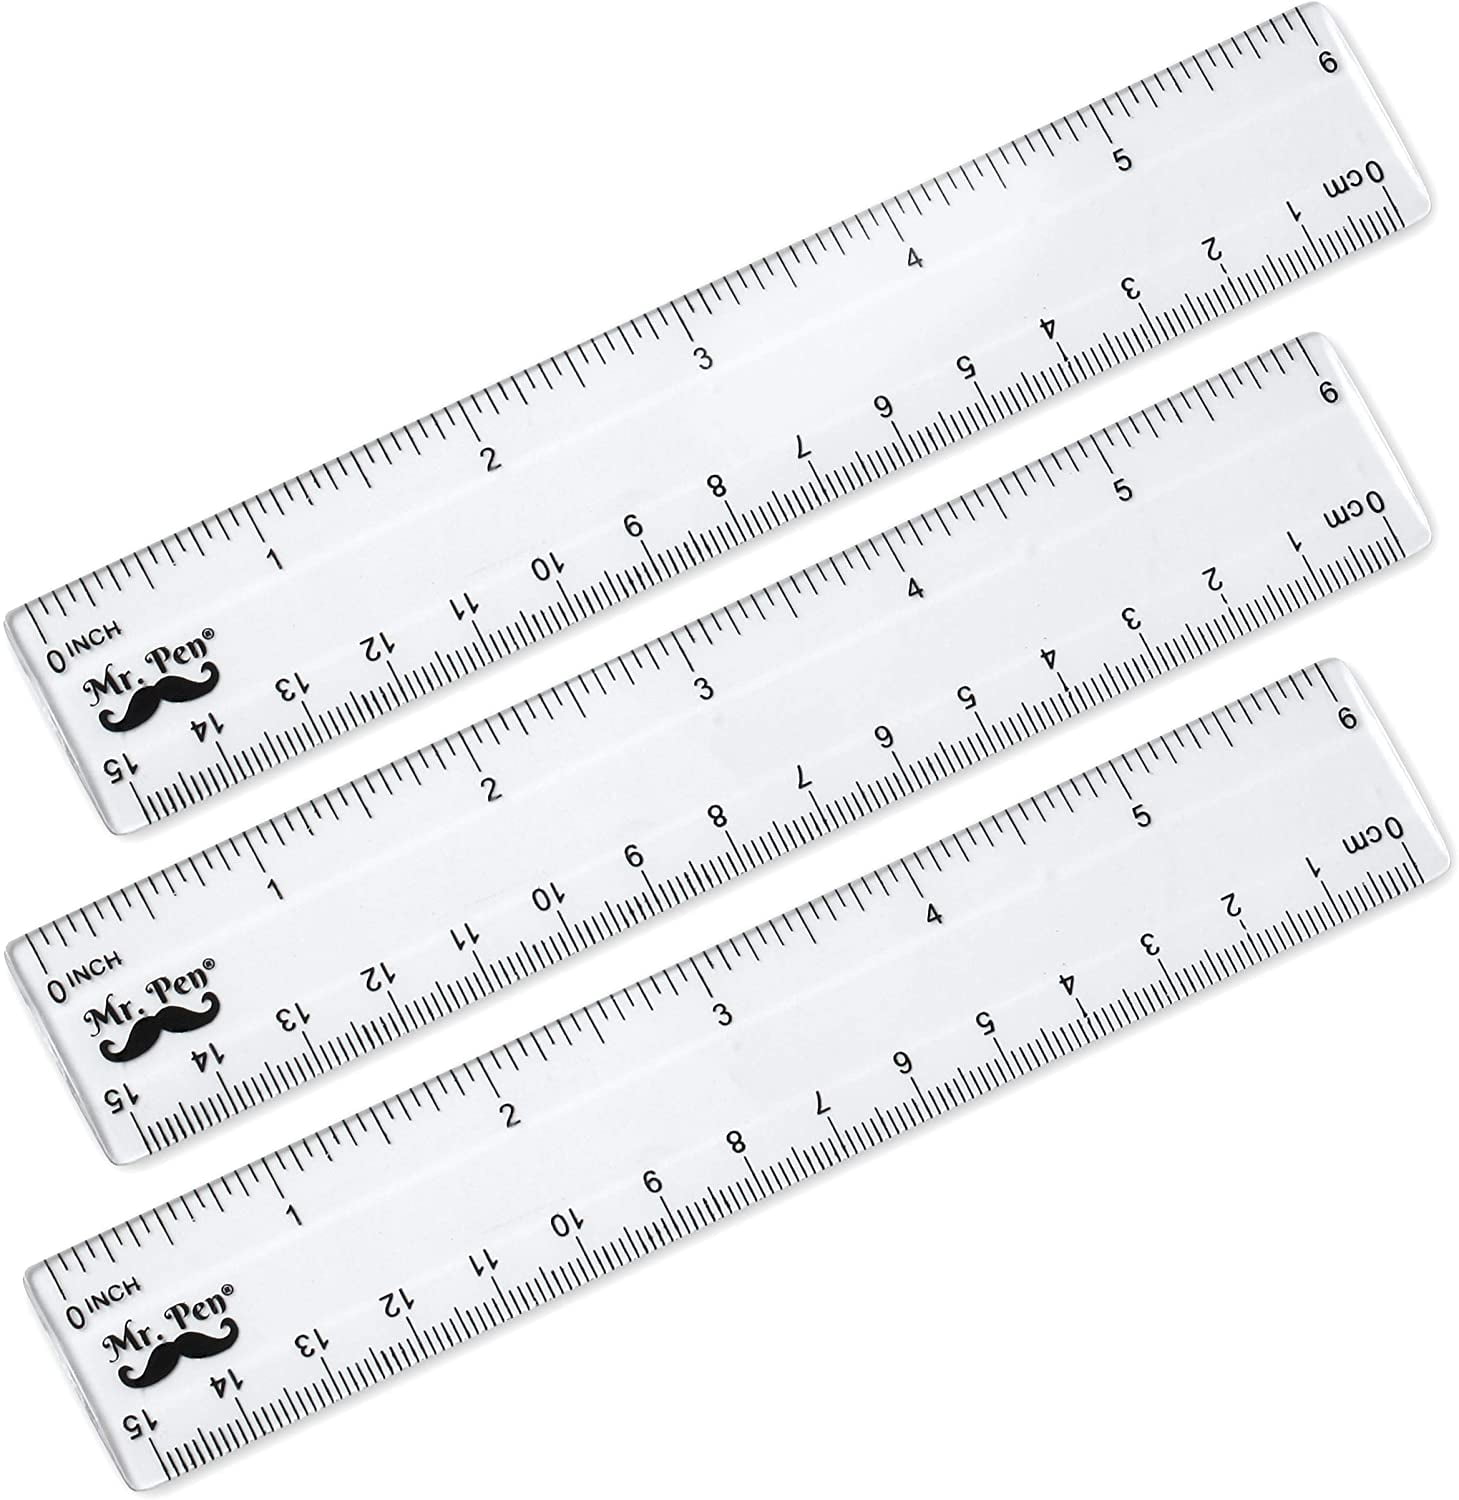 32 Packs 6 Inch Rulers Small Ruler Assorted Colors Small Plastic